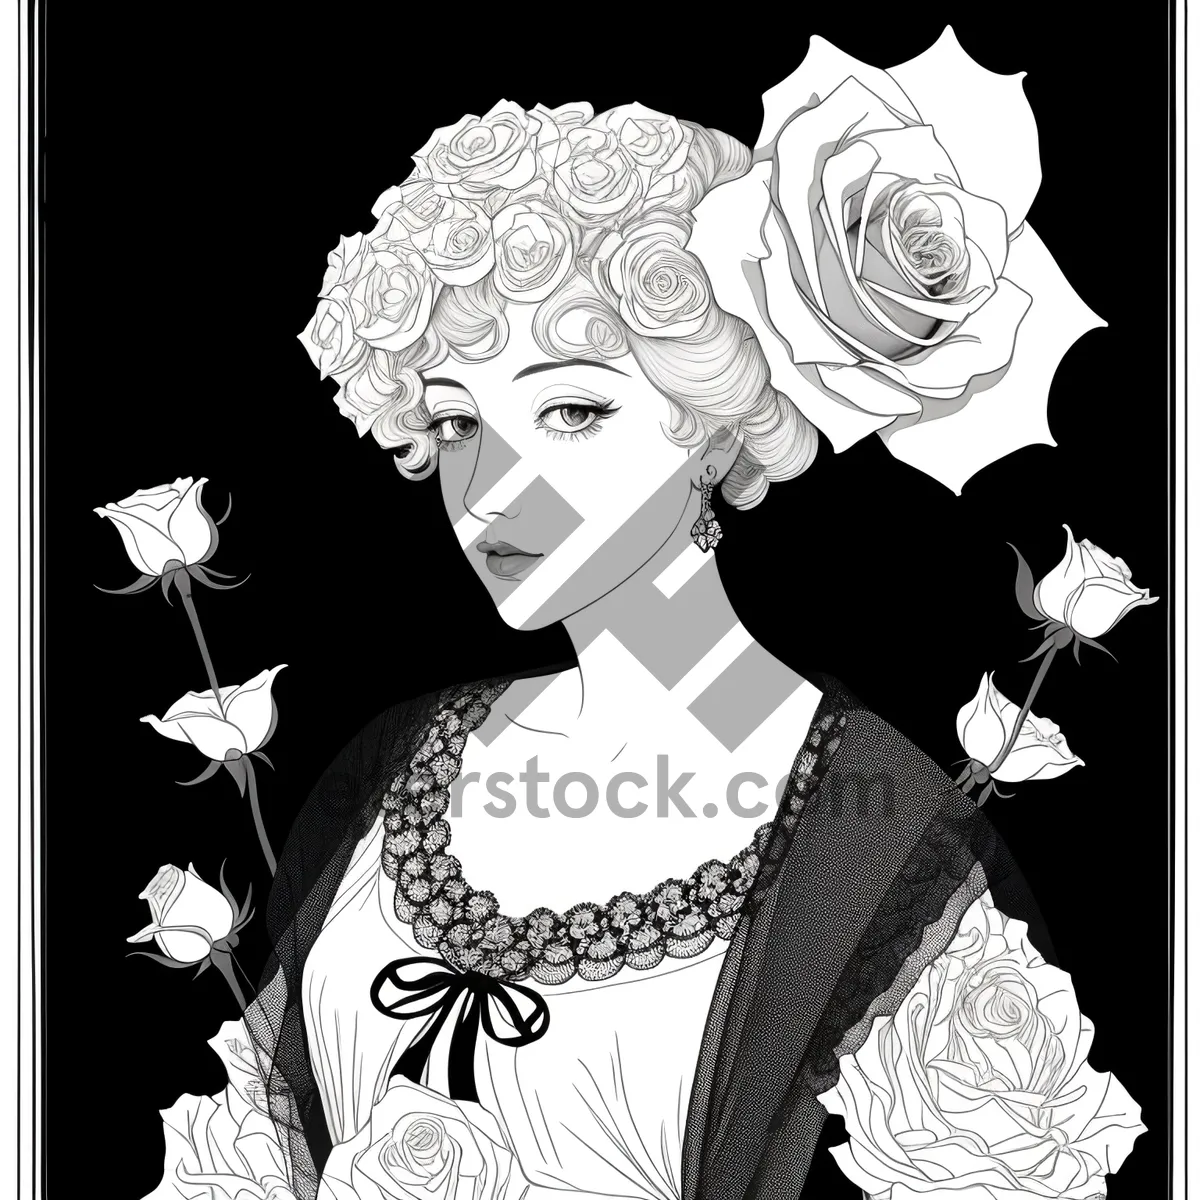 Picture of Elegant Bride: A Stylish Portrait of a Newlywed Lady with Black Hair